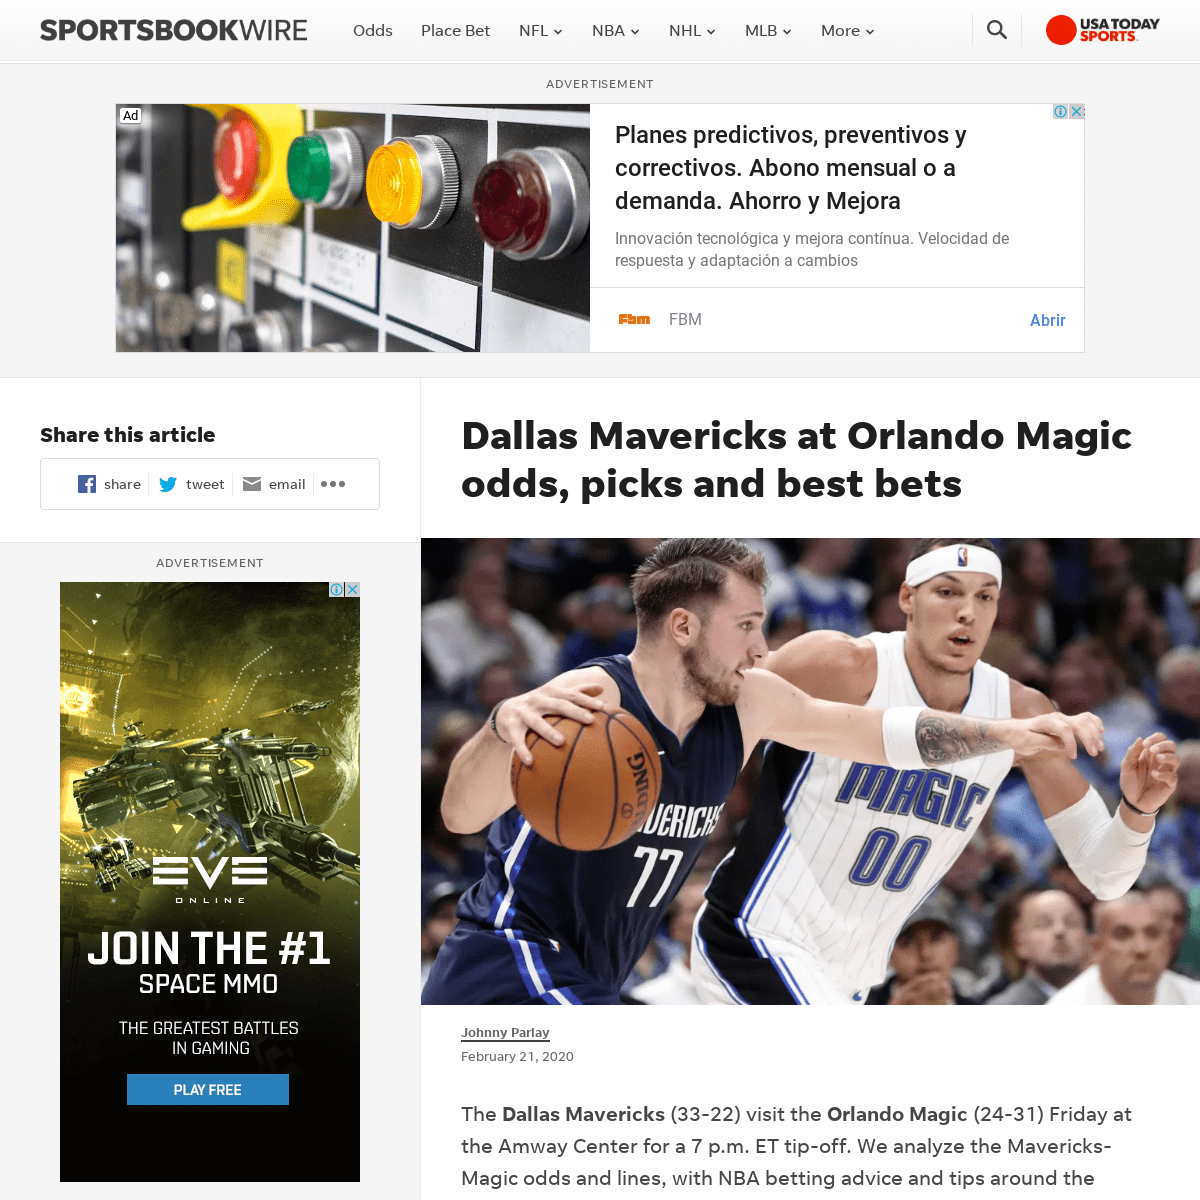 A complete backup of sportsbookwire.usatoday.com/2020/02/21/dallas-mavericks-at-orlando-magic-odds-picks-and-best-bets/